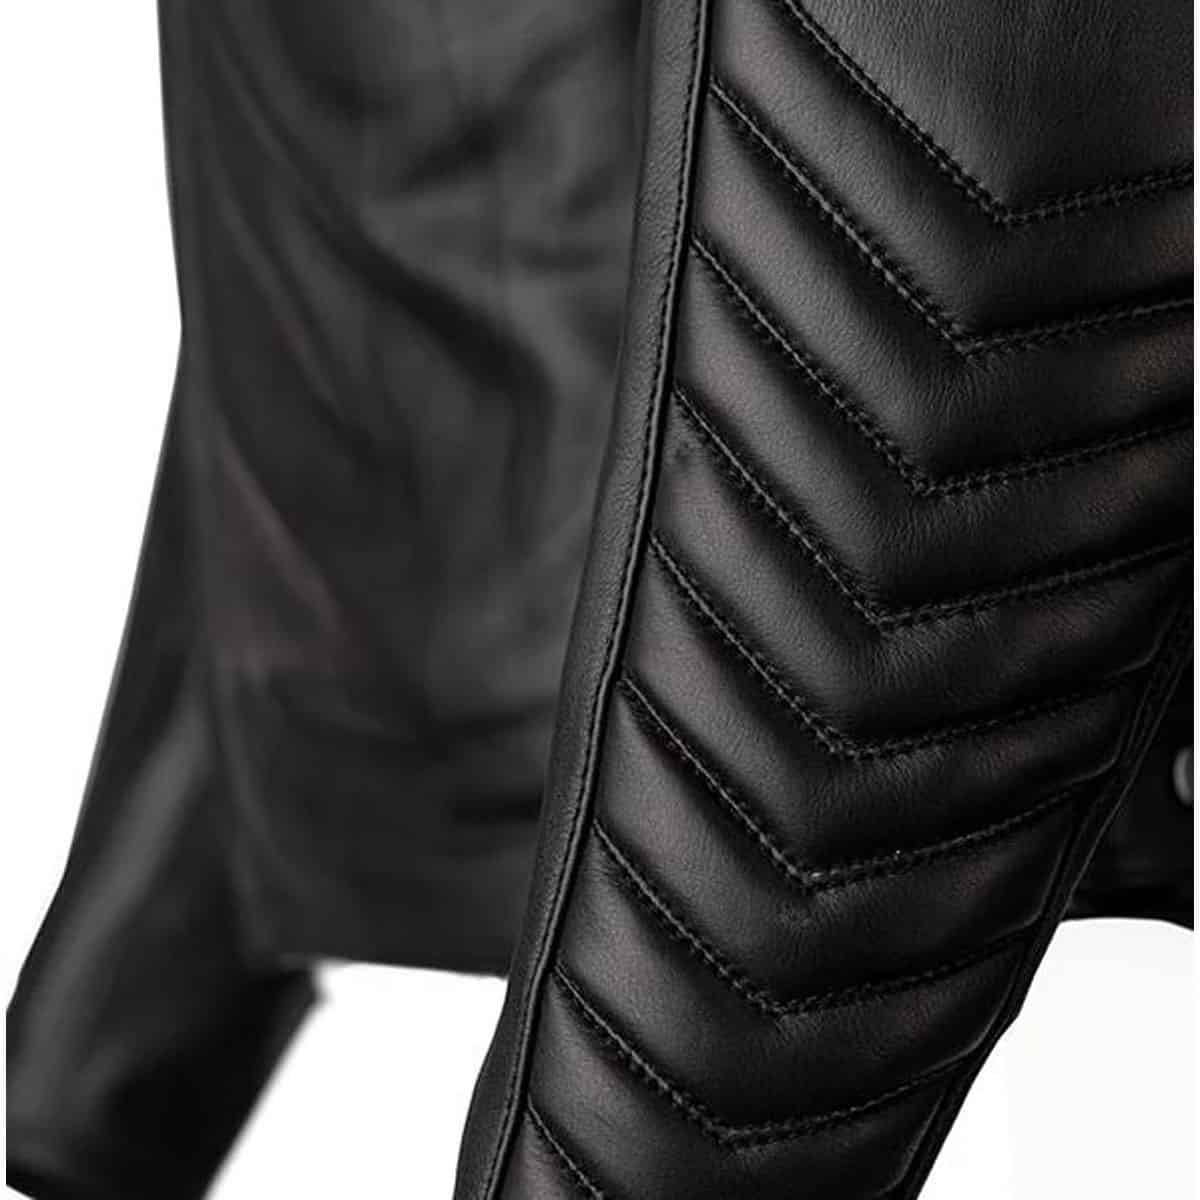 RST Roadster 3 leather motorcycle jacket quilted detail